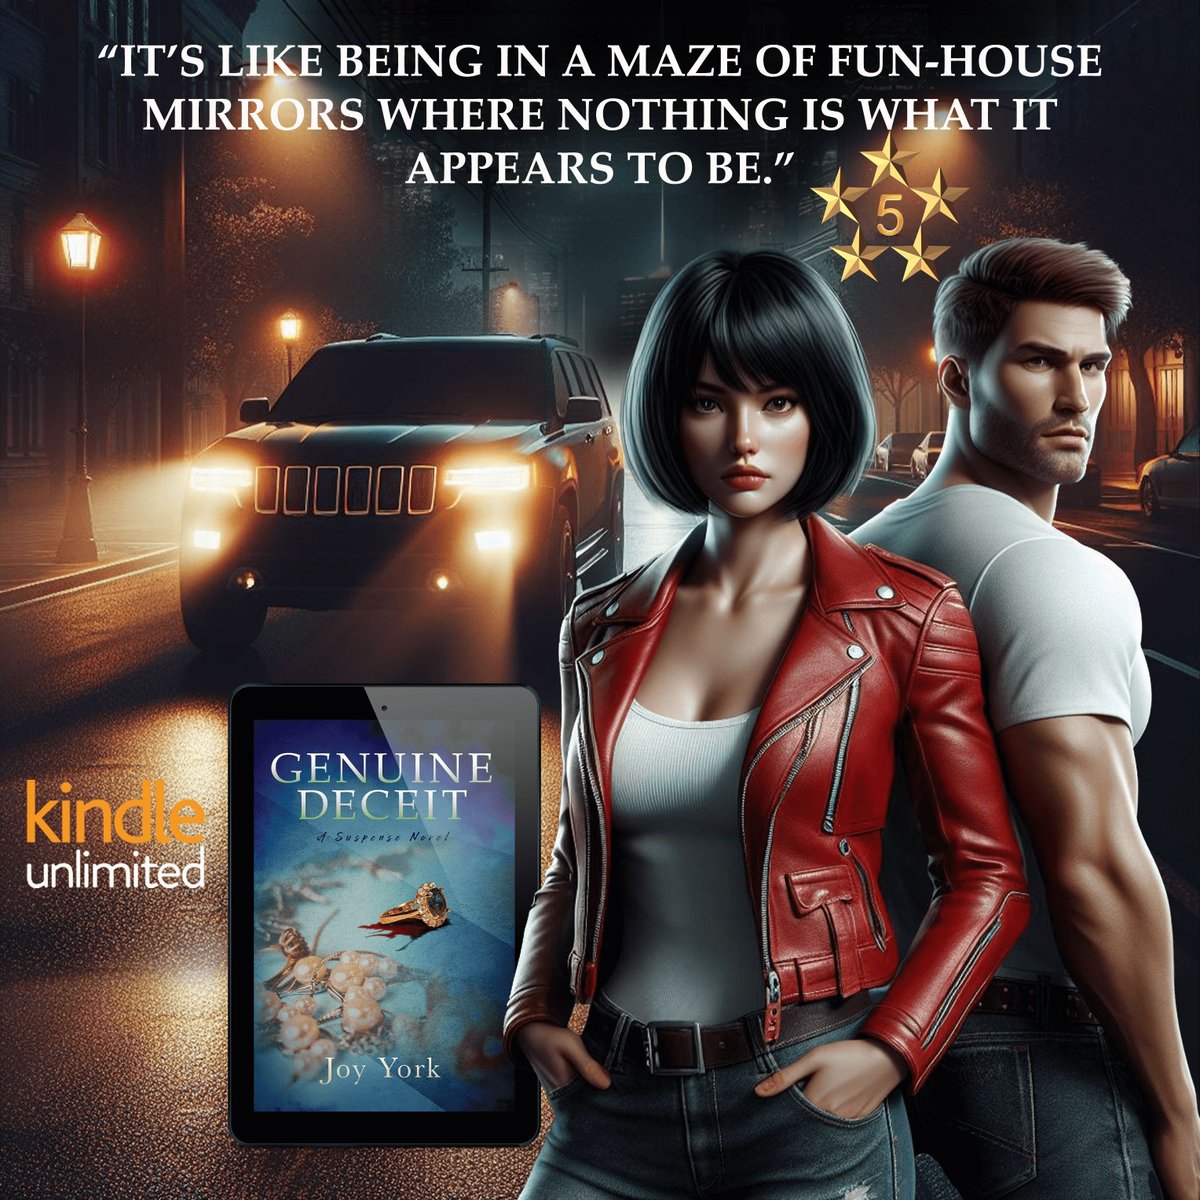 GENUINE DECEIT by @JoyYorkAuthor A fast-paced #mystery #thriller with a little #romance. #Kindle & #Free w/ #KU buff.ly/3wHAFUW #BookReview “A novel filled with intrigue, mystery, unsuspected romance, and twists.” #thriller #CrimeFiction #Booktwt #BooksWorthReading